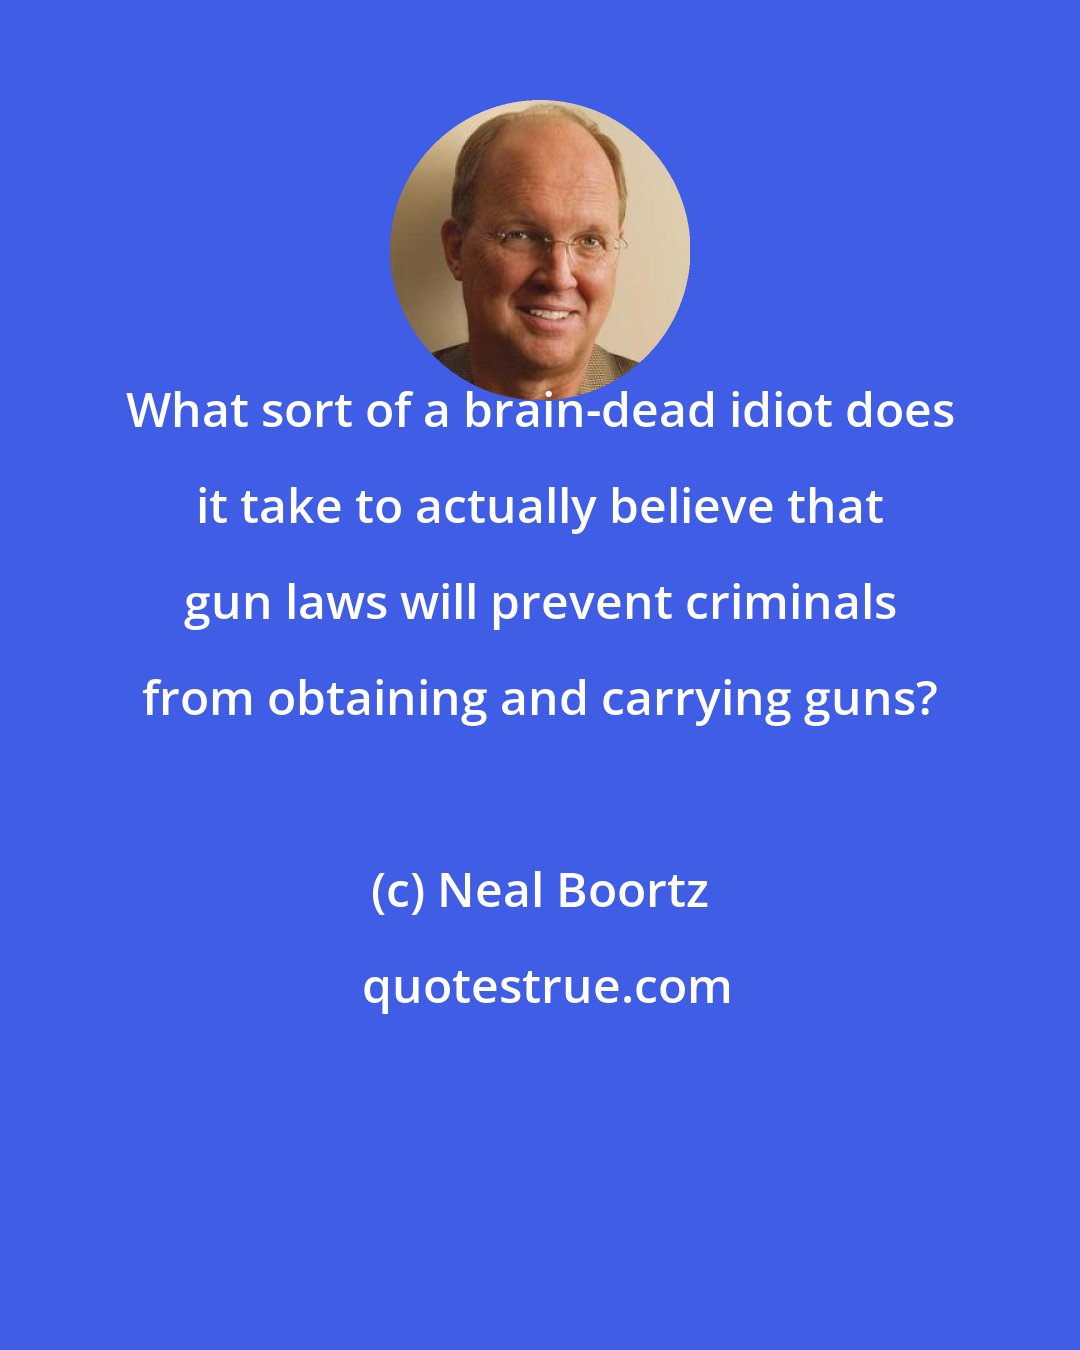 Neal Boortz: What sort of a brain-dead idiot does it take to actually believe that gun laws will prevent criminals from obtaining and carrying guns?